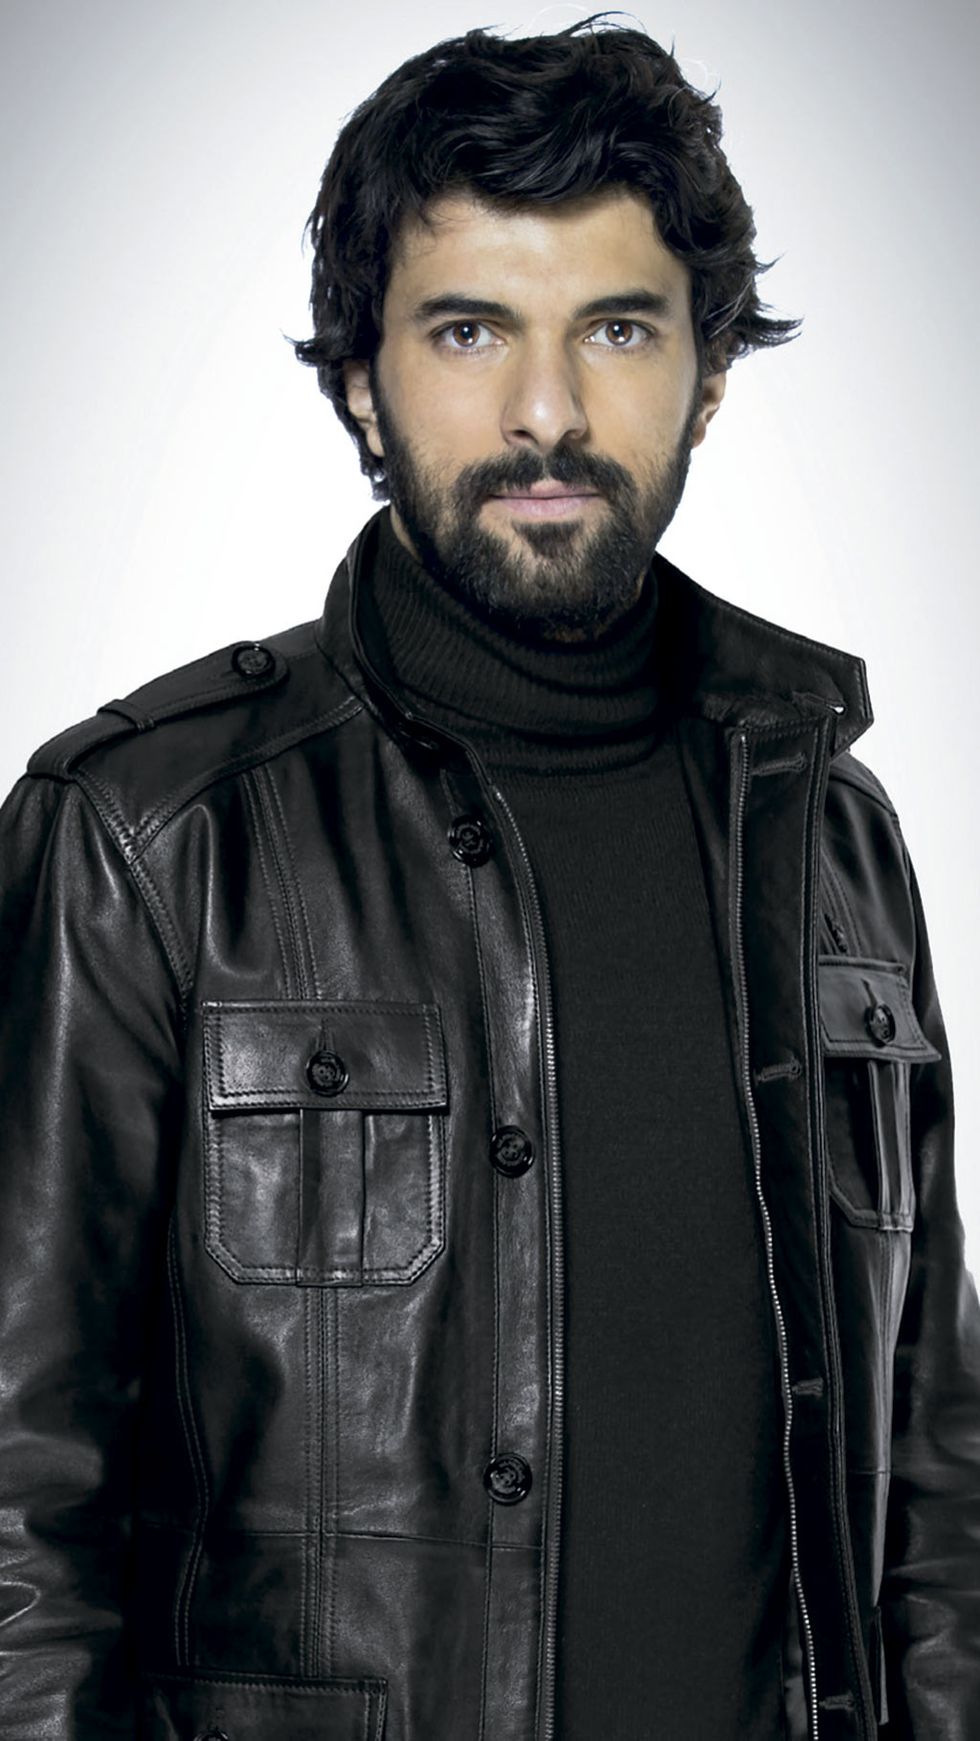 Hair, Facial hair, Beard, Leather, Jacket, Leather jacket, Hairstyle, Textile, Outerwear, Cool, 